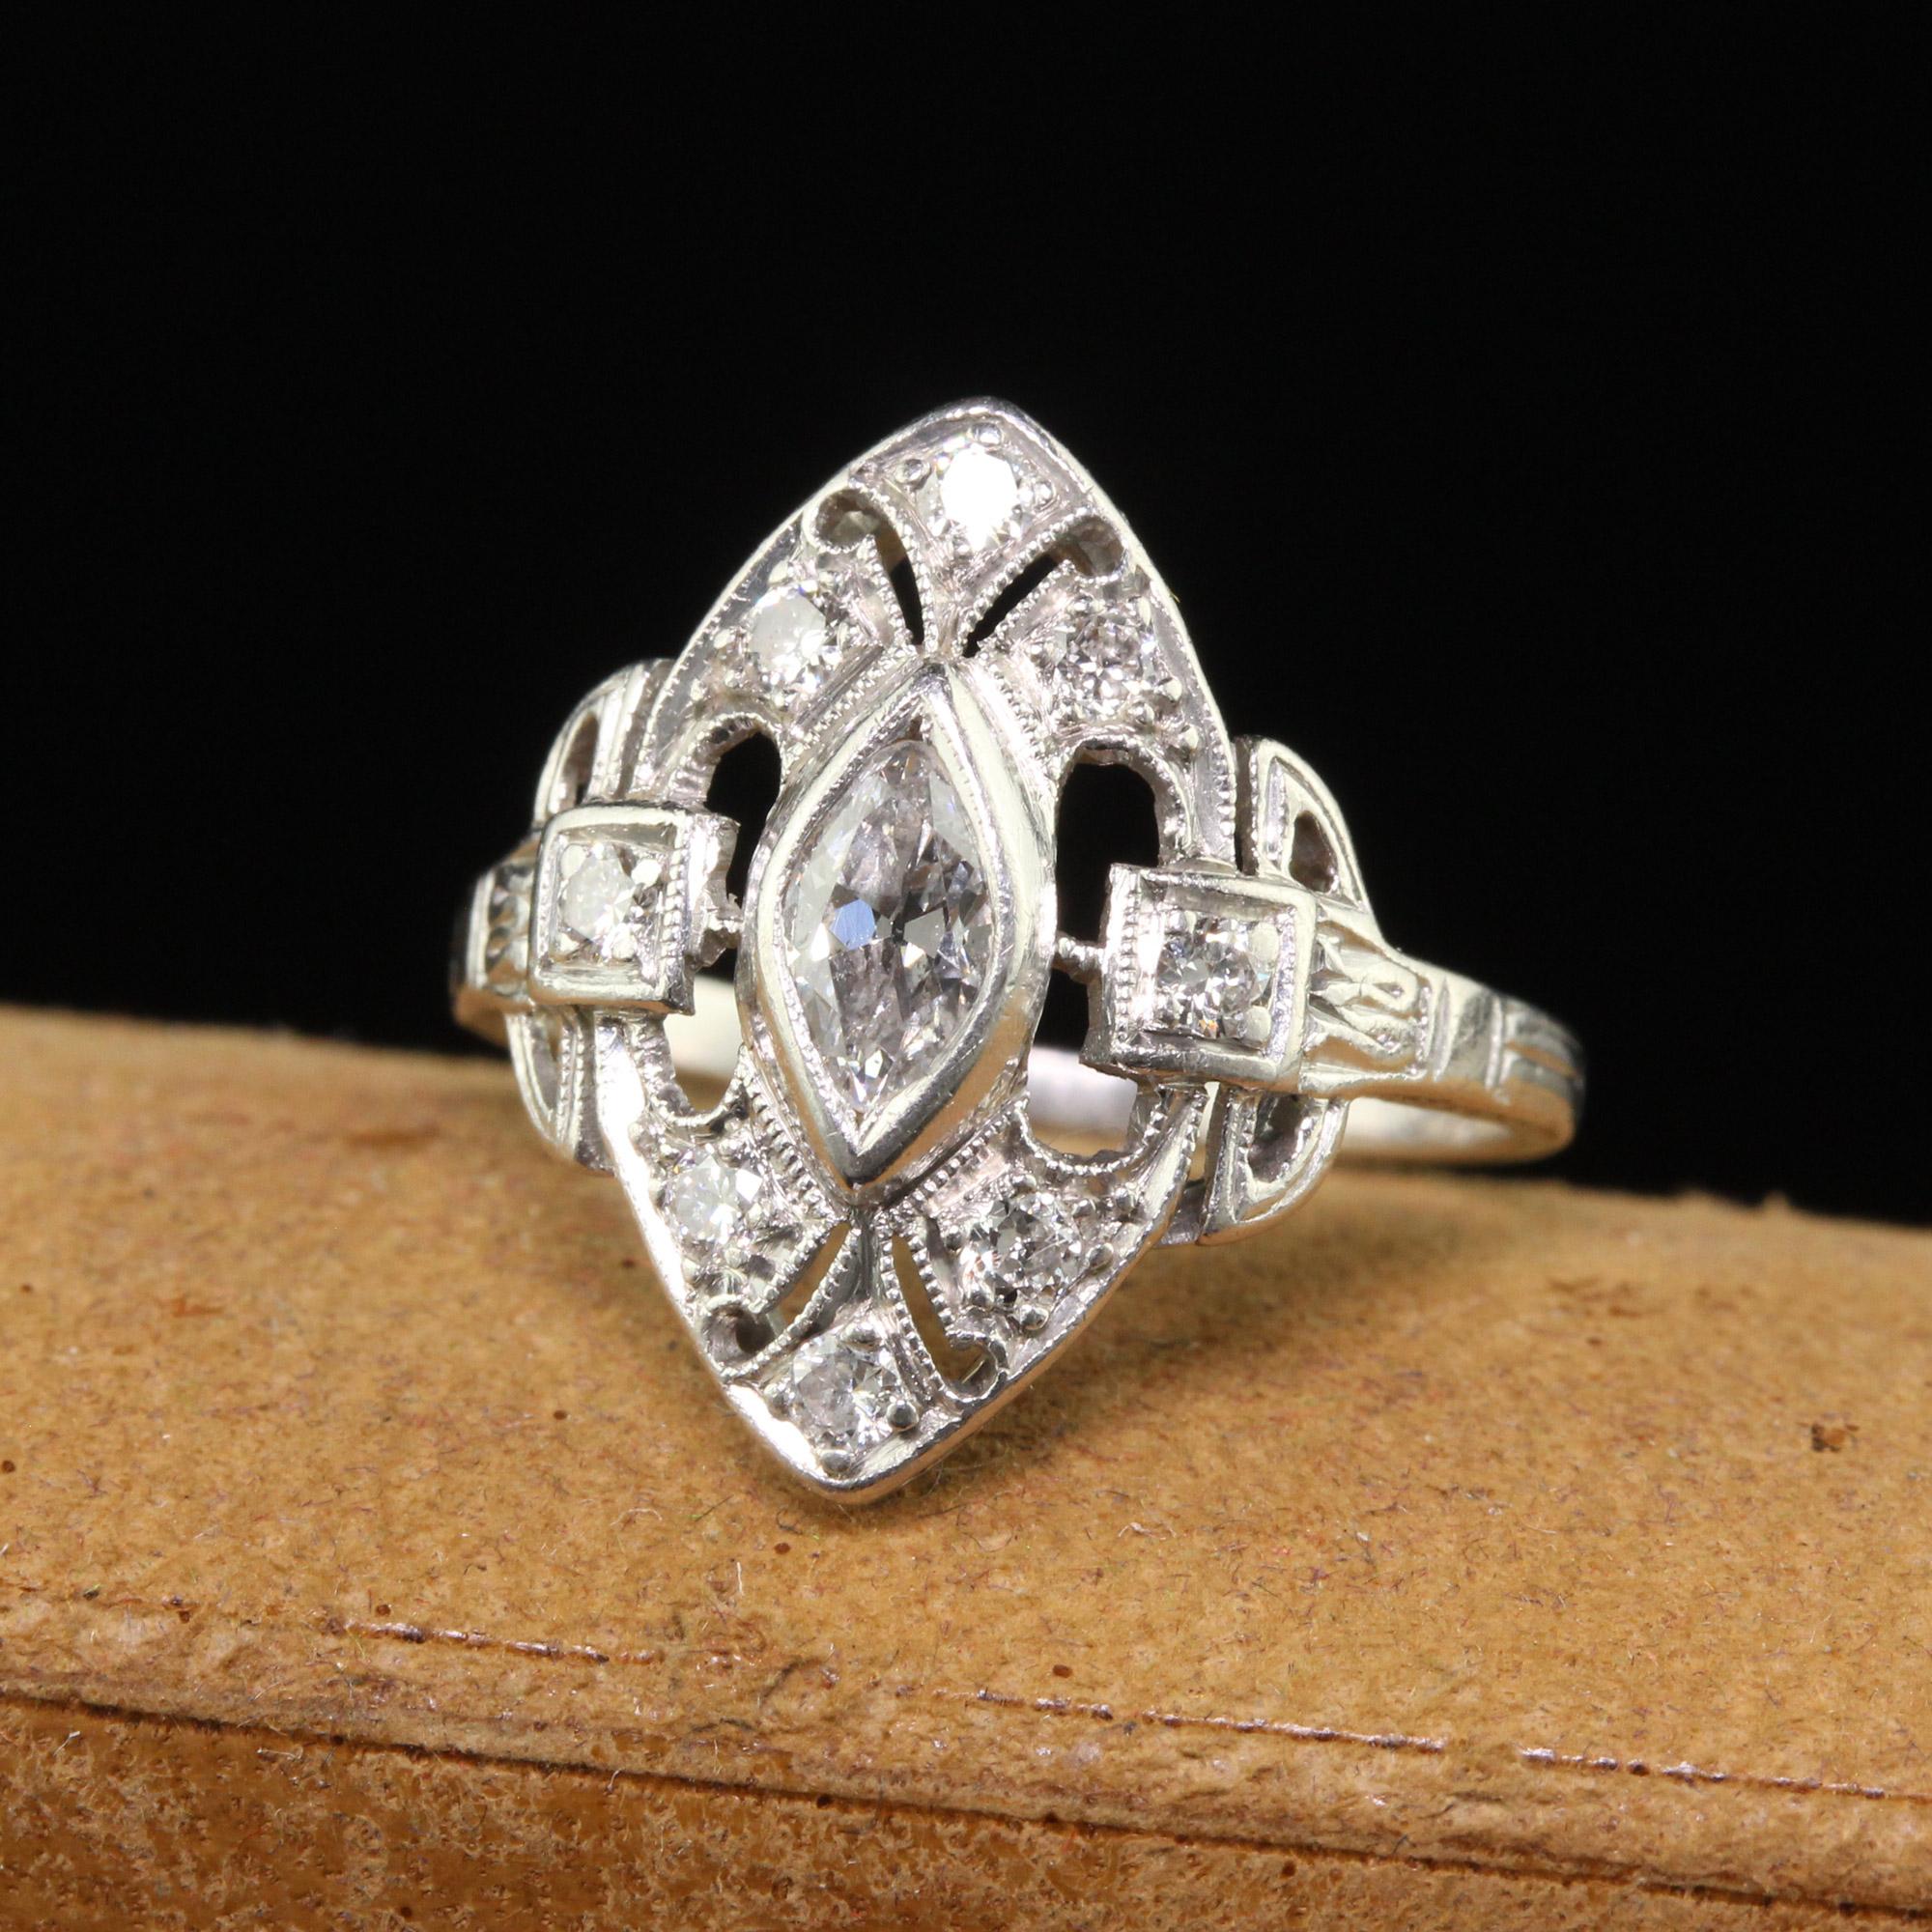 Beautiful Antique Art Deco Platinum Old Marquise Diamond Filigree Shield Ring. This gorgeous ring is crafted in platinum. The center holds an old marquise cut diamond and is surrounded by old European cut diamonds. The ring is in good condition and